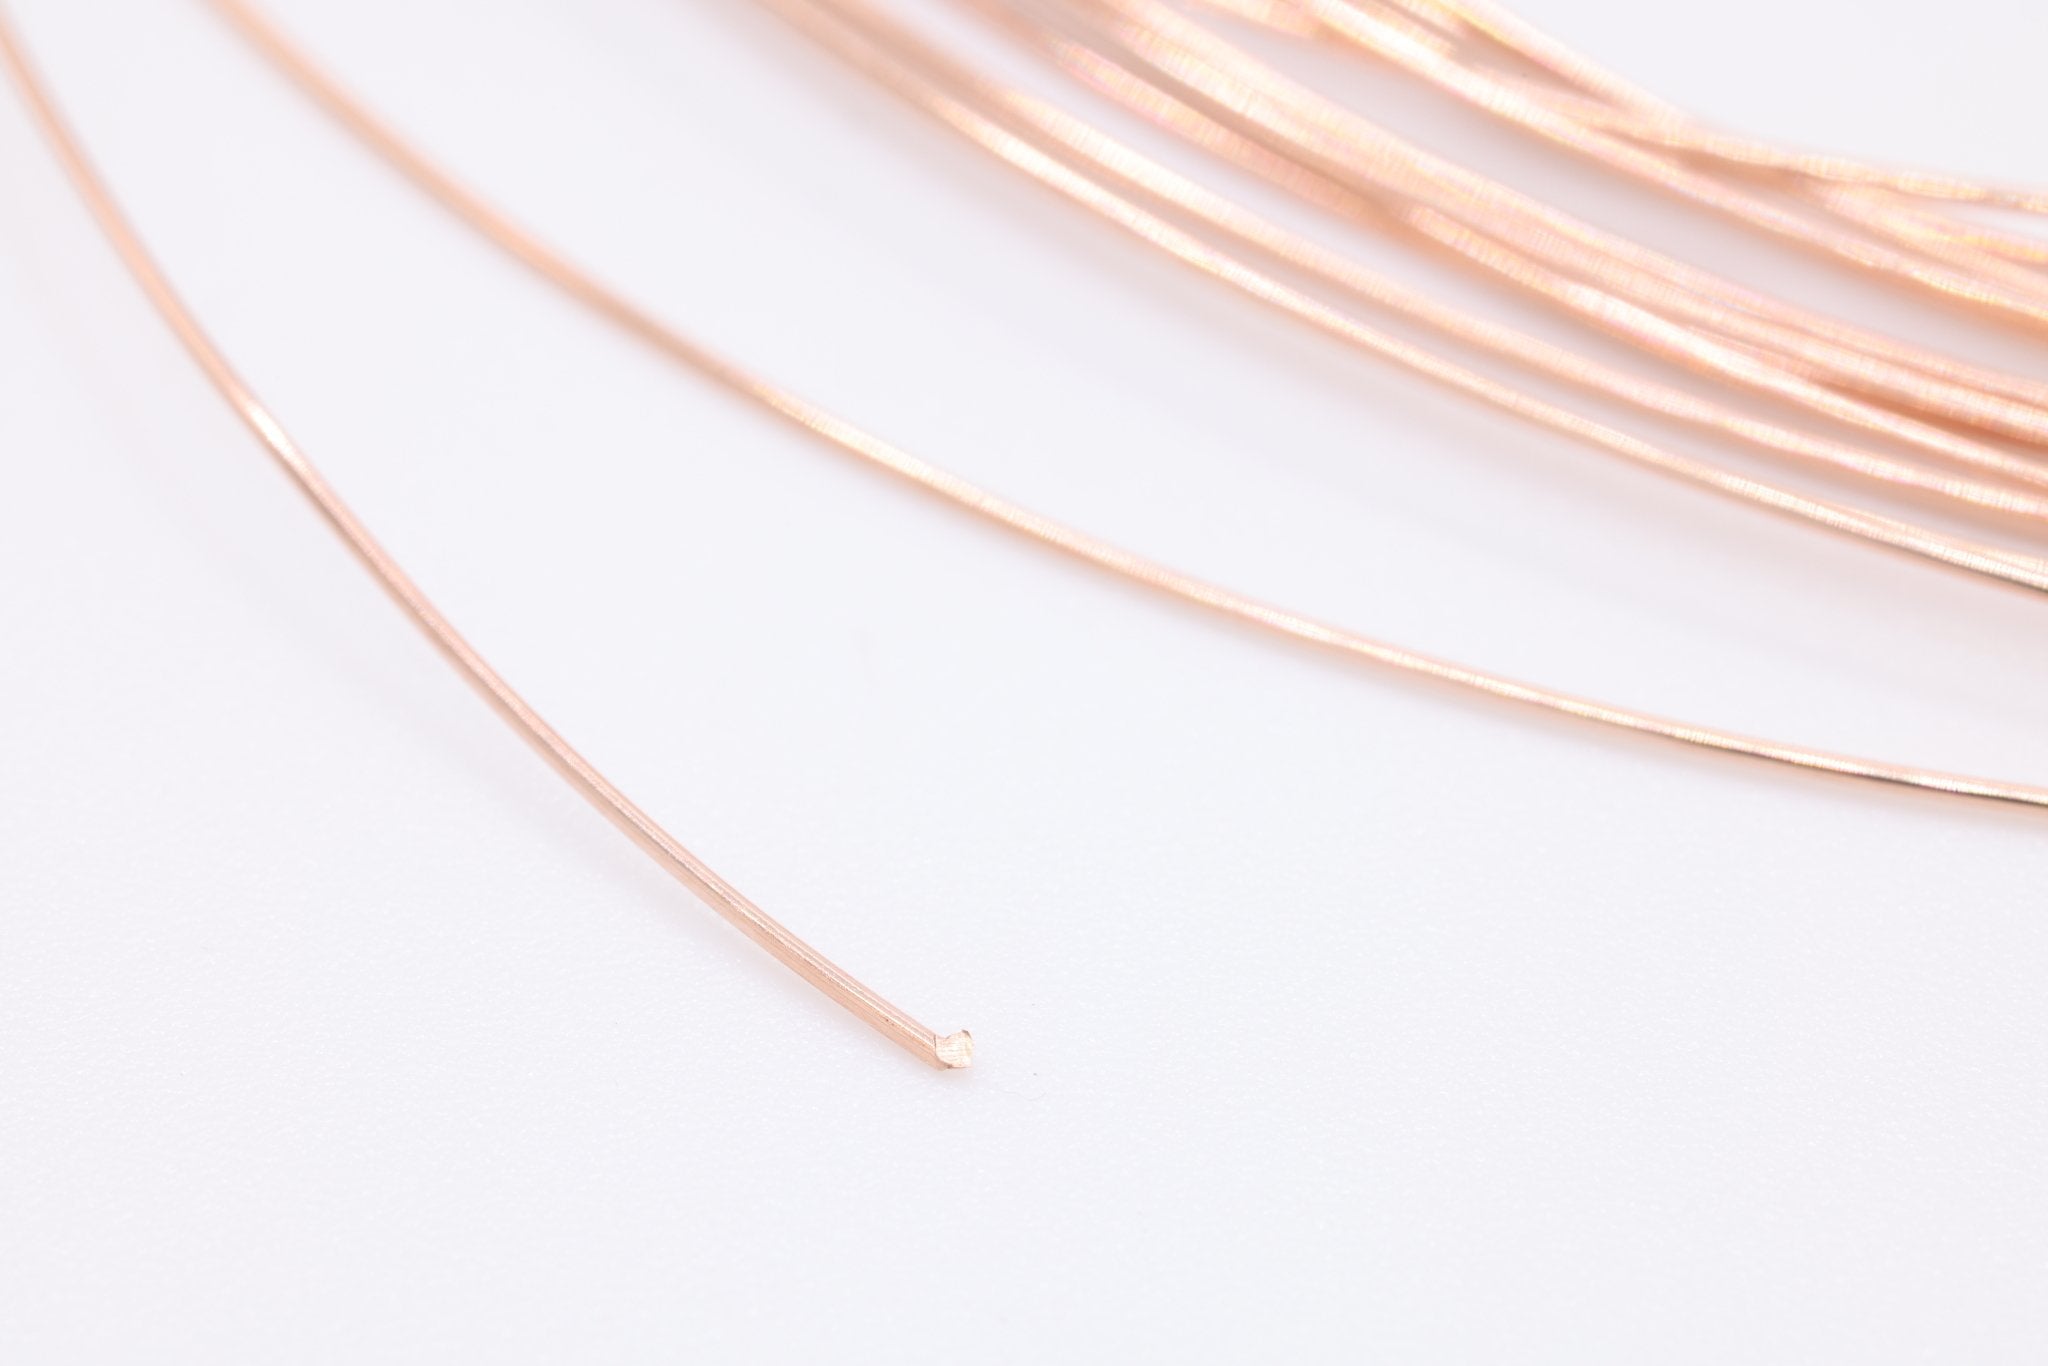 Rose Gold Filled Wire, 20 Gauge 0.8mm, Rose Gold-Filled, Half Hard Jewelry Wire - HarperCrown